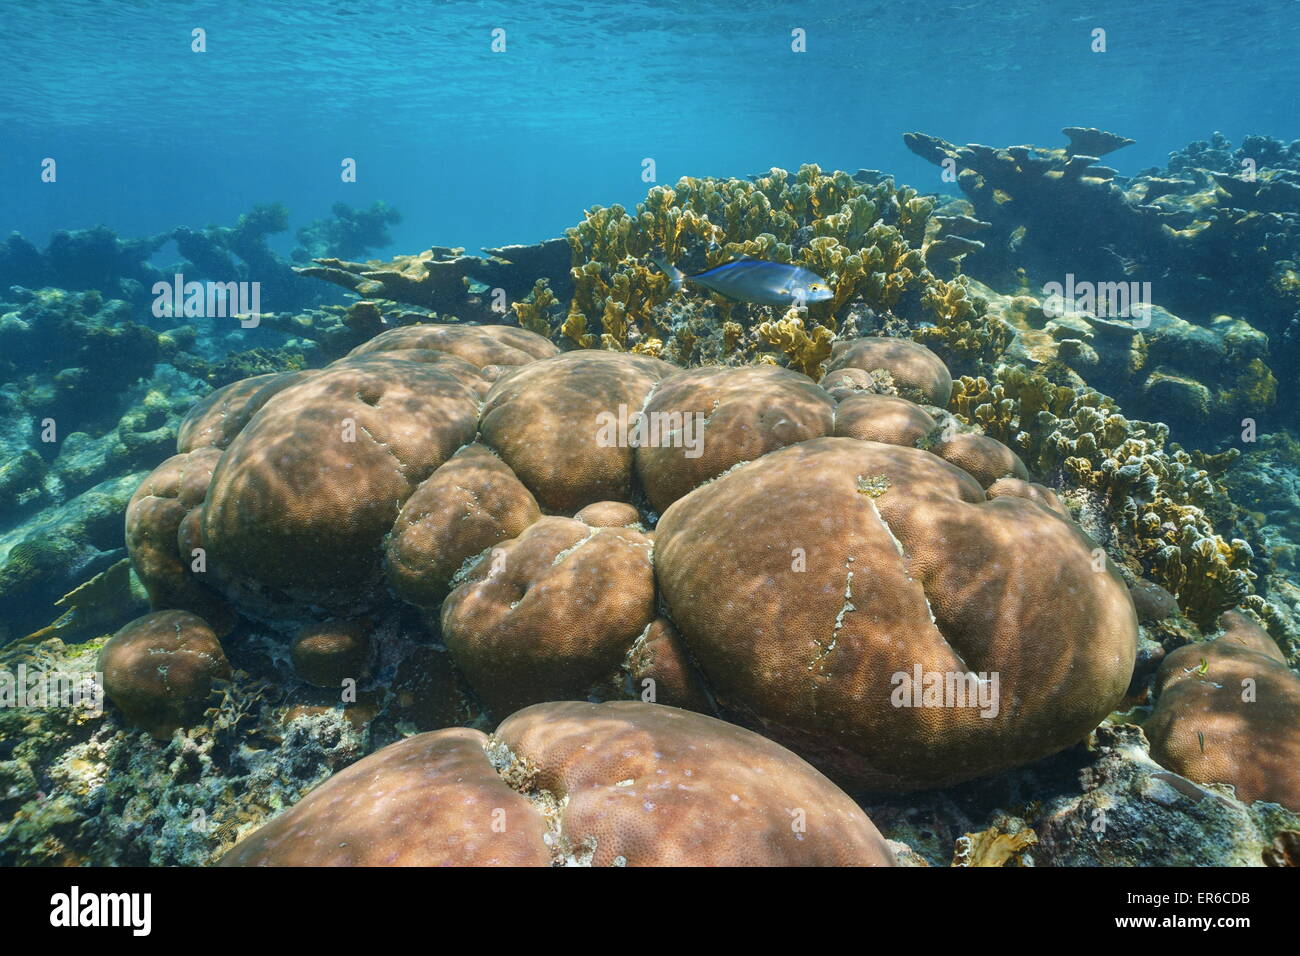 Underwater scenery in a stony coral reef of the Caribbean sea Stock Photo